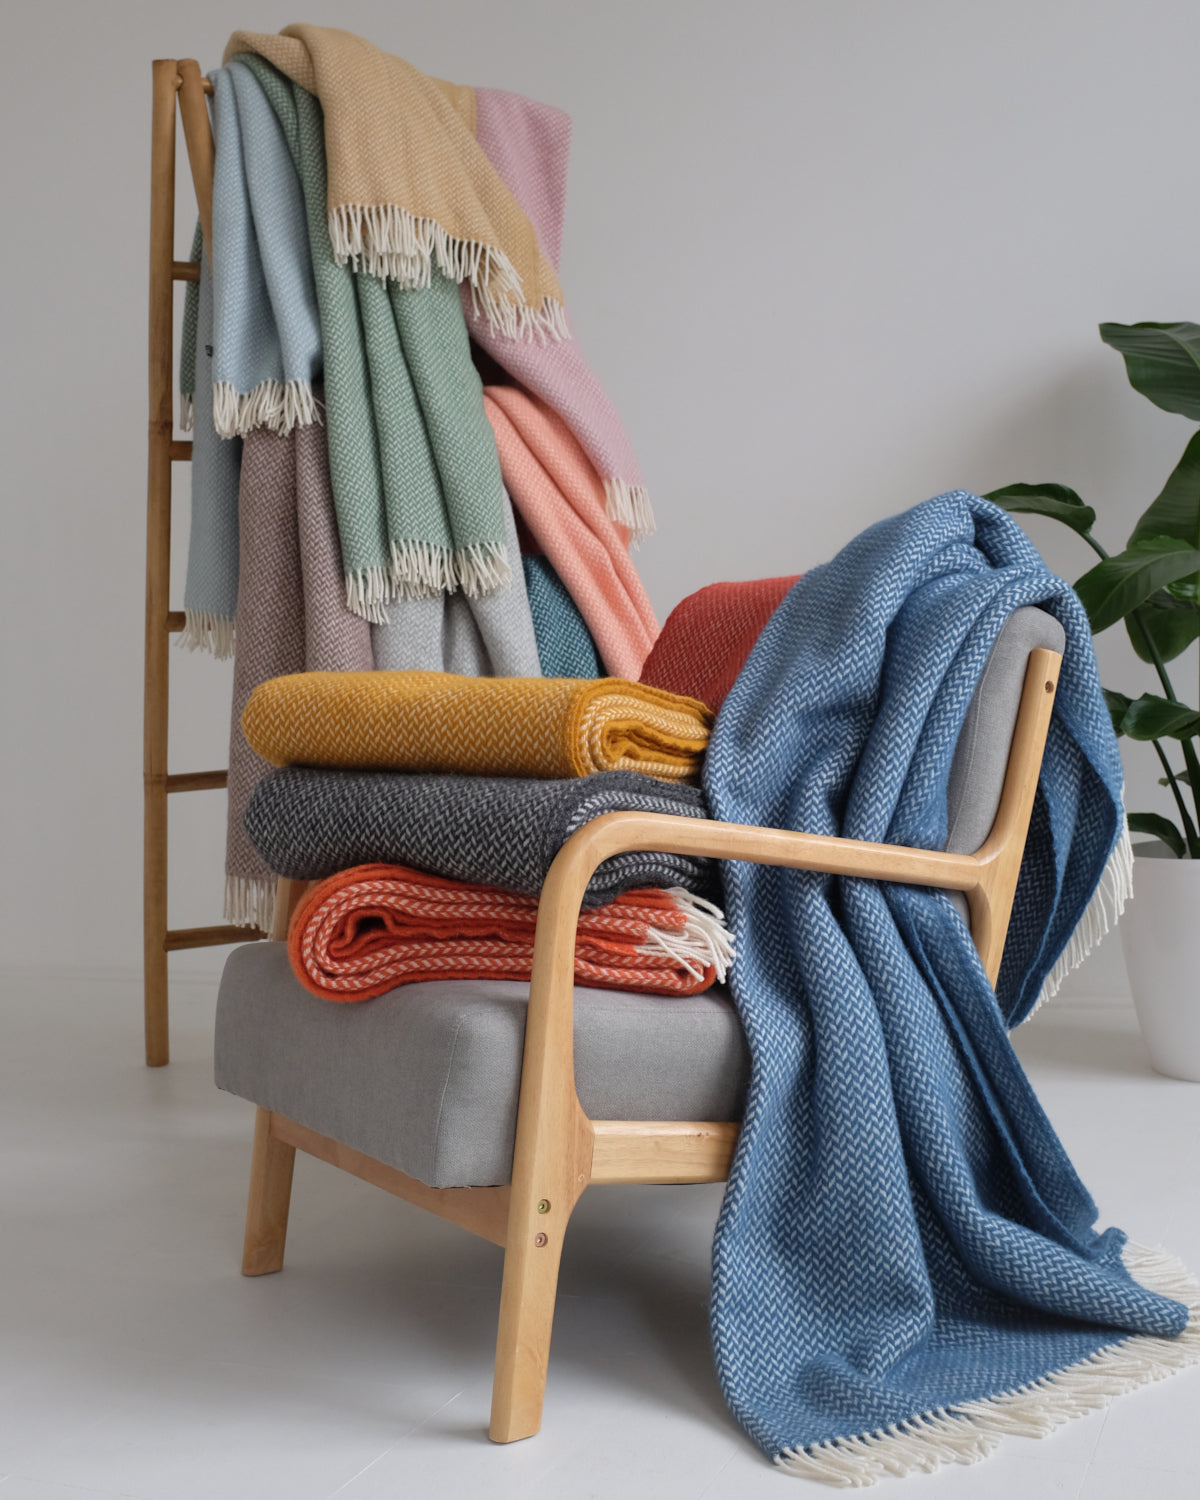 A stack of folded wool blankets on a lounge chair. Wool blankets hanging on a ladder in the background.